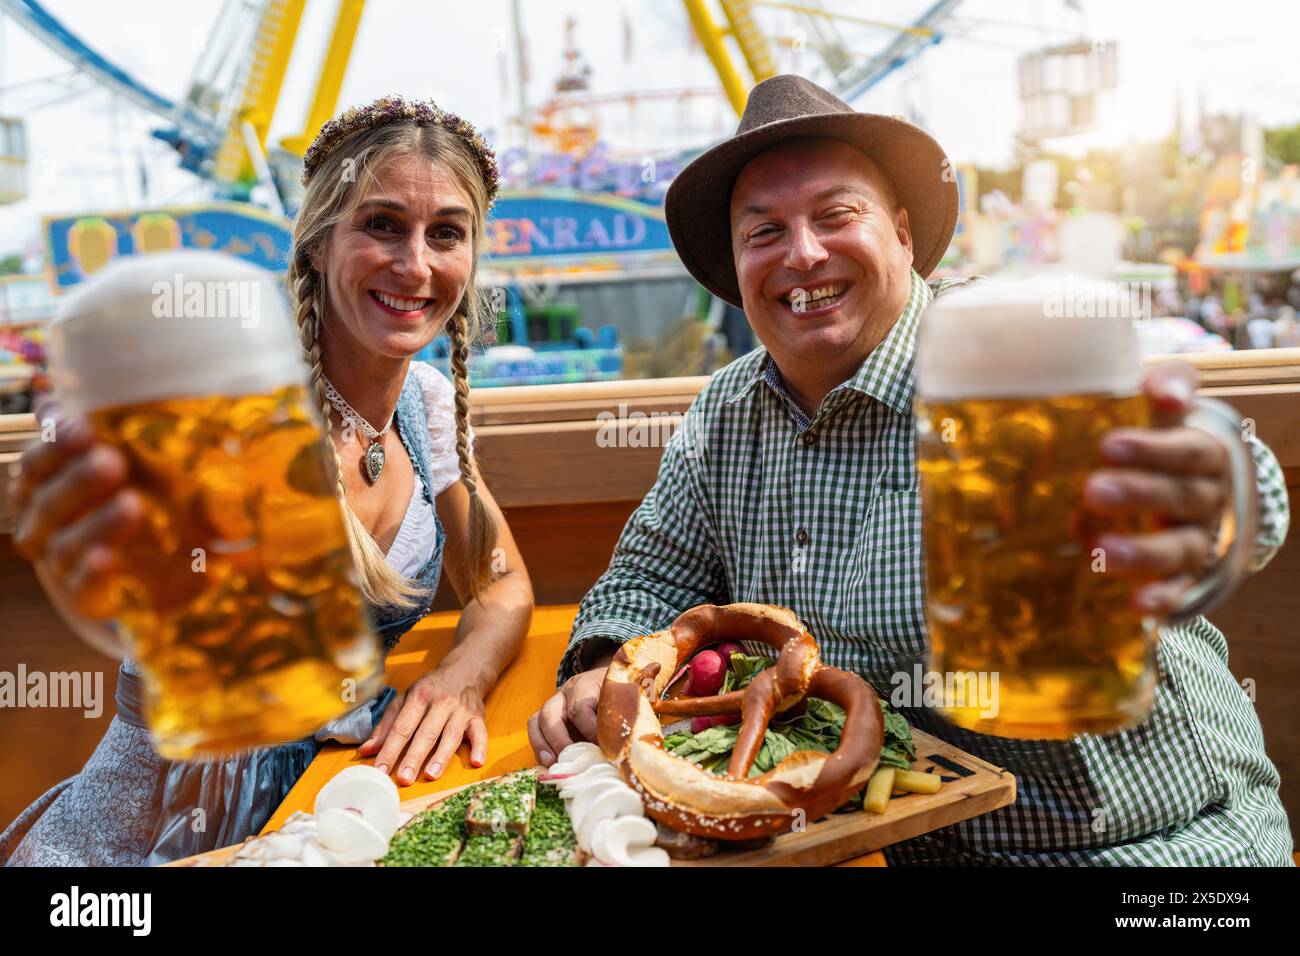 Man and woman in traditional outfits raising beer mugs at a oktoberfest festival, with food on the table and rides in background in munich germany Stock Photo